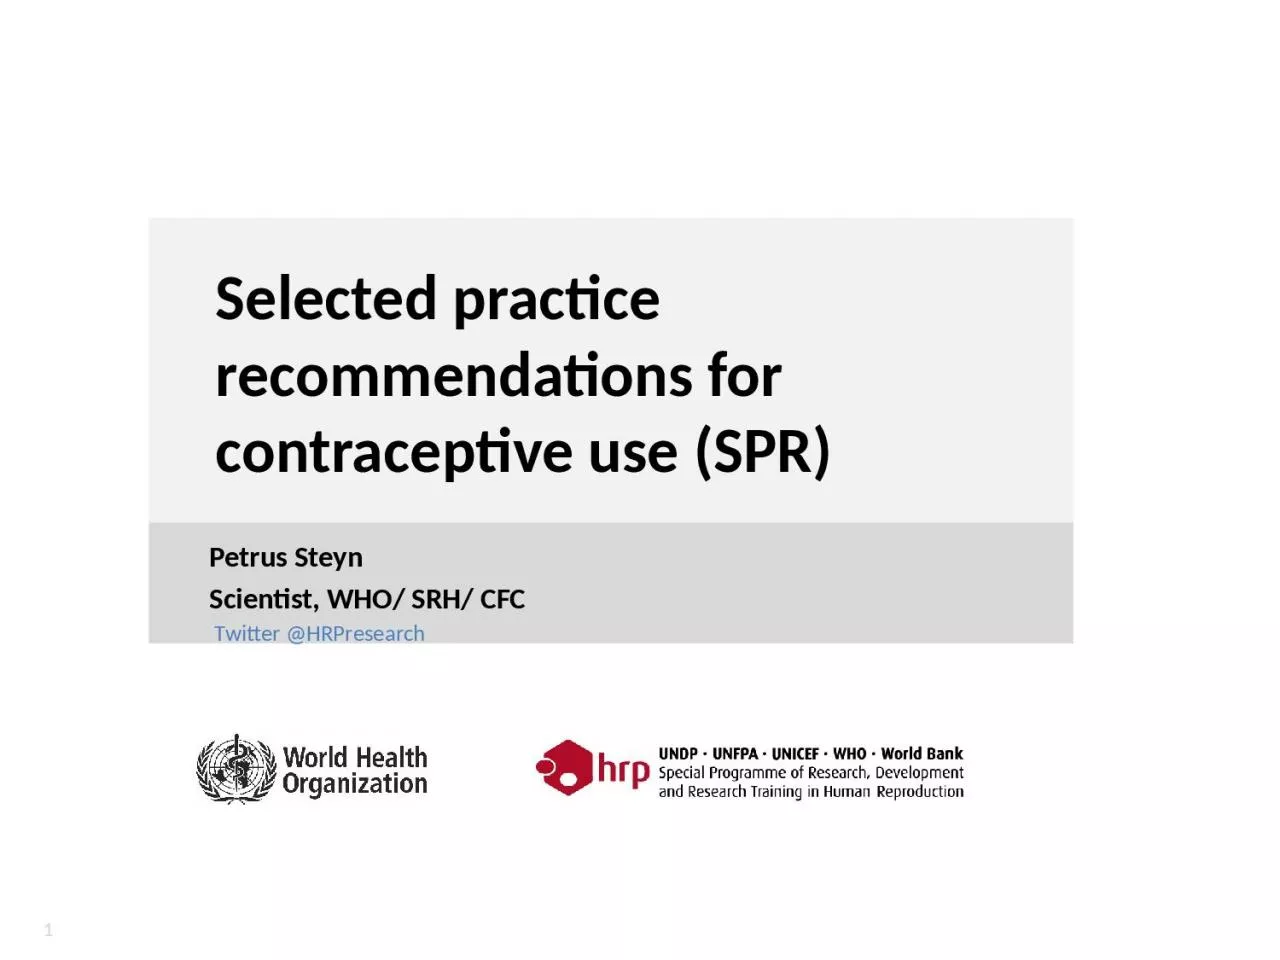 Selected practice recommendations for contraceptive use (SPR)